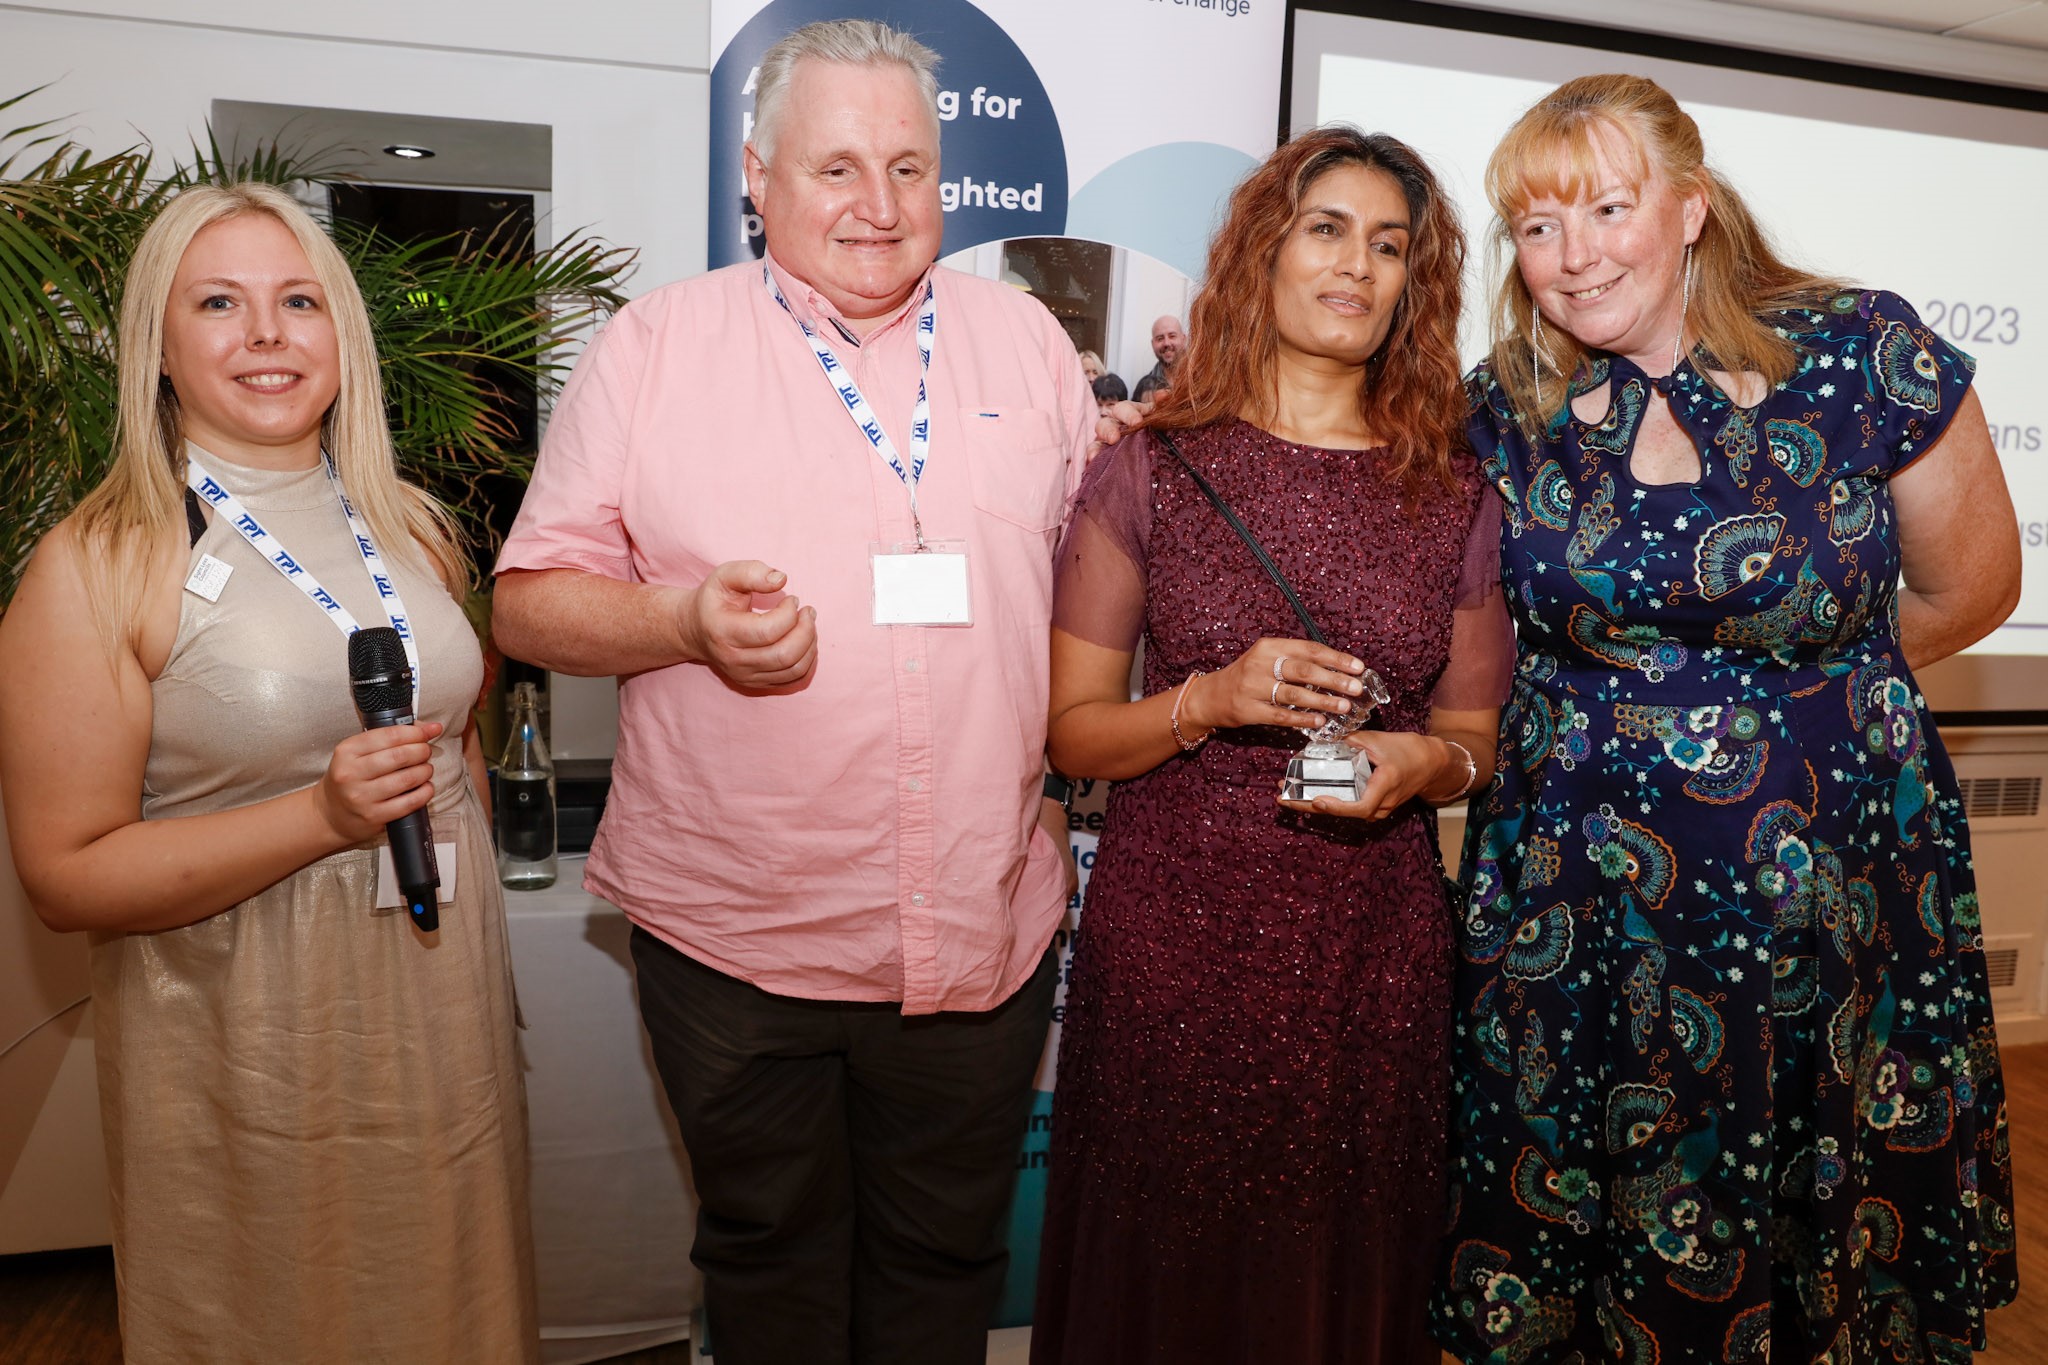 From left to right: Helen Mitchell, Trustee at TPT, Alun Davies, Anela Wood, WOE SLC member, and Tricia Sail. They are stood in a line, smiling at the camera. Anela is holding their award for Team of the Year.